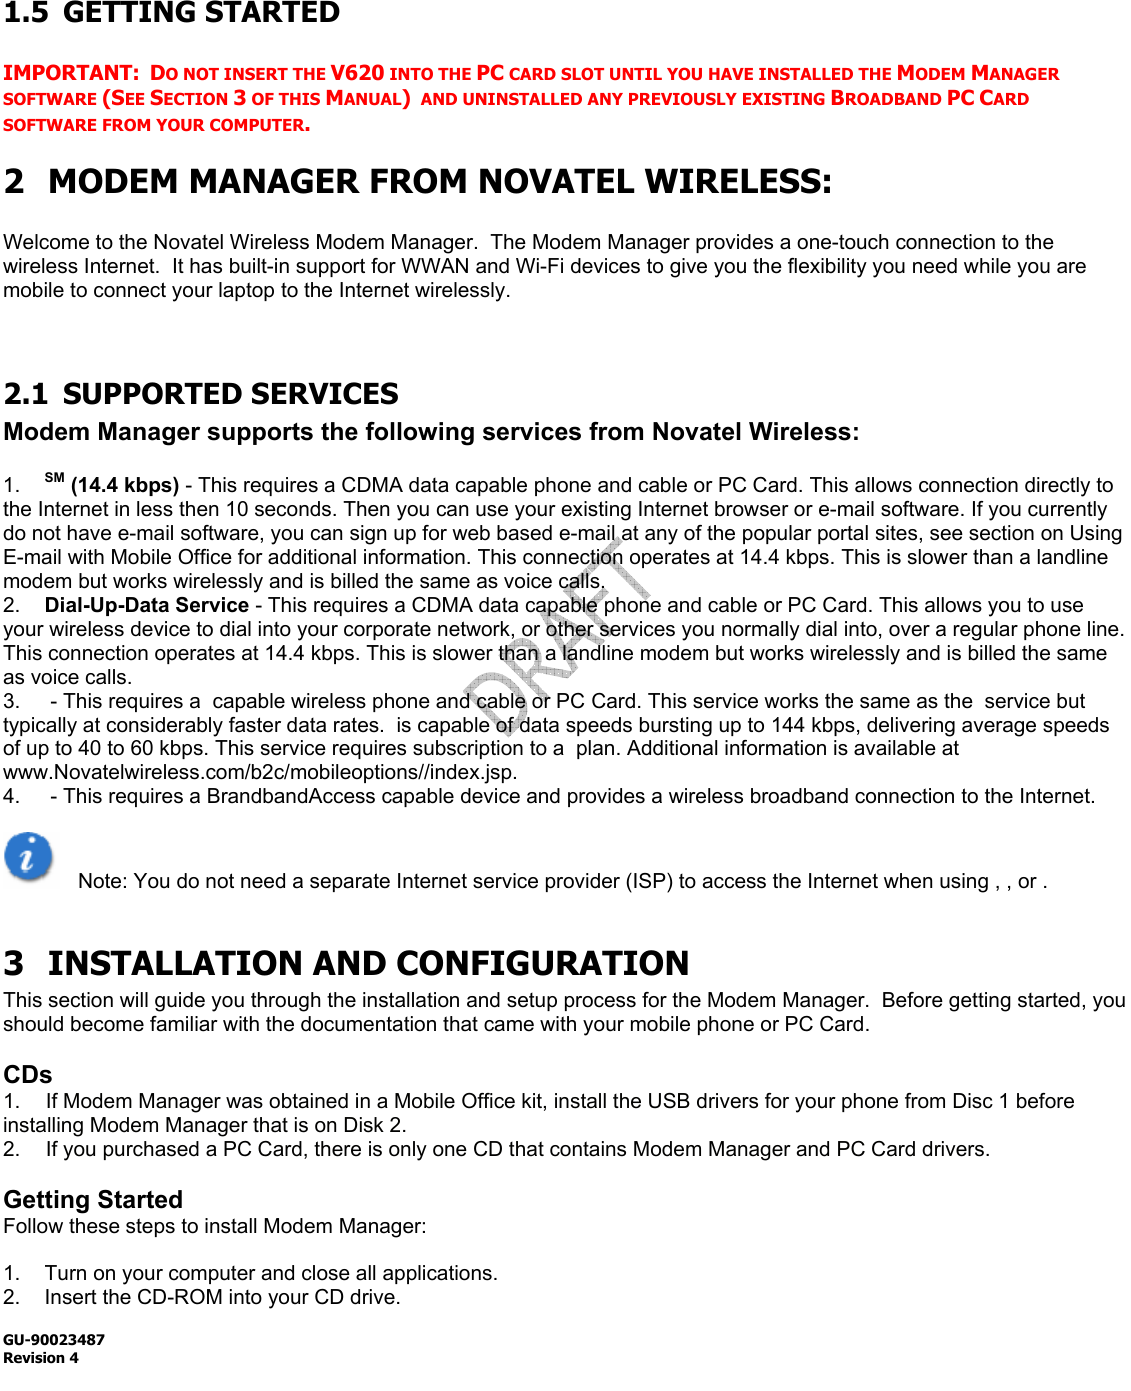  GU-90023487 Revision 4    1.5 GETTING STARTED  IMPORTANT:  DO NOT INSERT THE V620 INTO THE PC CARD SLOT UNTIL YOU HAVE INSTALLED THE MODEM MANAGER SOFTWARE (SEE SECTION 3 OF THIS MANUAL)  AND UNINSTALLED ANY PREVIOUSLY EXISTING BROADBAND PC CARD SOFTWARE FROM YOUR COMPUTER. 2 MODEM MANAGER FROM NOVATEL WIRELESS:  Welcome to the Novatel Wireless Modem Manager.  The Modem Manager provides a one-touch connection to the wireless Internet.  It has built-in support for WWAN and Wi-Fi devices to give you the flexibility you need while you are mobile to connect your laptop to the Internet wirelessly.   2.1 SUPPORTED SERVICES Modem Manager supports the following services from Novatel Wireless:  1.  SM (14.4 kbps) - This requires a CDMA data capable phone and cable or PC Card. This allows connection directly to the Internet in less then 10 seconds. Then you can use your existing Internet browser or e-mail software. If you currently do not have e-mail software, you can sign up for web based e-mail at any of the popular portal sites, see section on Using E-mail with Mobile Office for additional information. This connection operates at 14.4 kbps. This is slower than a landline modem but works wirelessly and is billed the same as voice calls. 2.  Dial-Up-Data Service - This requires a CDMA data capable phone and cable or PC Card. This allows you to use your wireless device to dial into your corporate network, or other services you normally dial into, over a regular phone line. This connection operates at 14.4 kbps. This is slower than a landline modem but works wirelessly and is billed the same as voice calls. 3.   - This requires a  capable wireless phone and cable or PC Card. This service works the same as the  service but typically at considerably faster data rates.  is capable of data speeds bursting up to 144 kbps, delivering average speeds of up to 40 to 60 kbps. This service requires subscription to a  plan. Additional information is available at www.Novatelwireless.com/b2c/mobileoptions//index.jsp. 4.   - This requires a BrandbandAccess capable device and provides a wireless broadband connection to the Internet.     Note: You do not need a separate Internet service provider (ISP) to access the Internet when using , , or .  3 INSTALLATION AND CONFIGURATION This section will guide you through the installation and setup process for the Modem Manager.  Before getting started, you should become familiar with the documentation that came with your mobile phone or PC Card.  CDs 1.  If Modem Manager was obtained in a Mobile Office kit, install the USB drivers for your phone from Disc 1 before installing Modem Manager that is on Disk 2. 2.  If you purchased a PC Card, there is only one CD that contains Modem Manager and PC Card drivers.    Getting Started Follow these steps to install Modem Manager:  1.  Turn on your computer and close all applications. 2.  Insert the CD-ROM into your CD drive. 